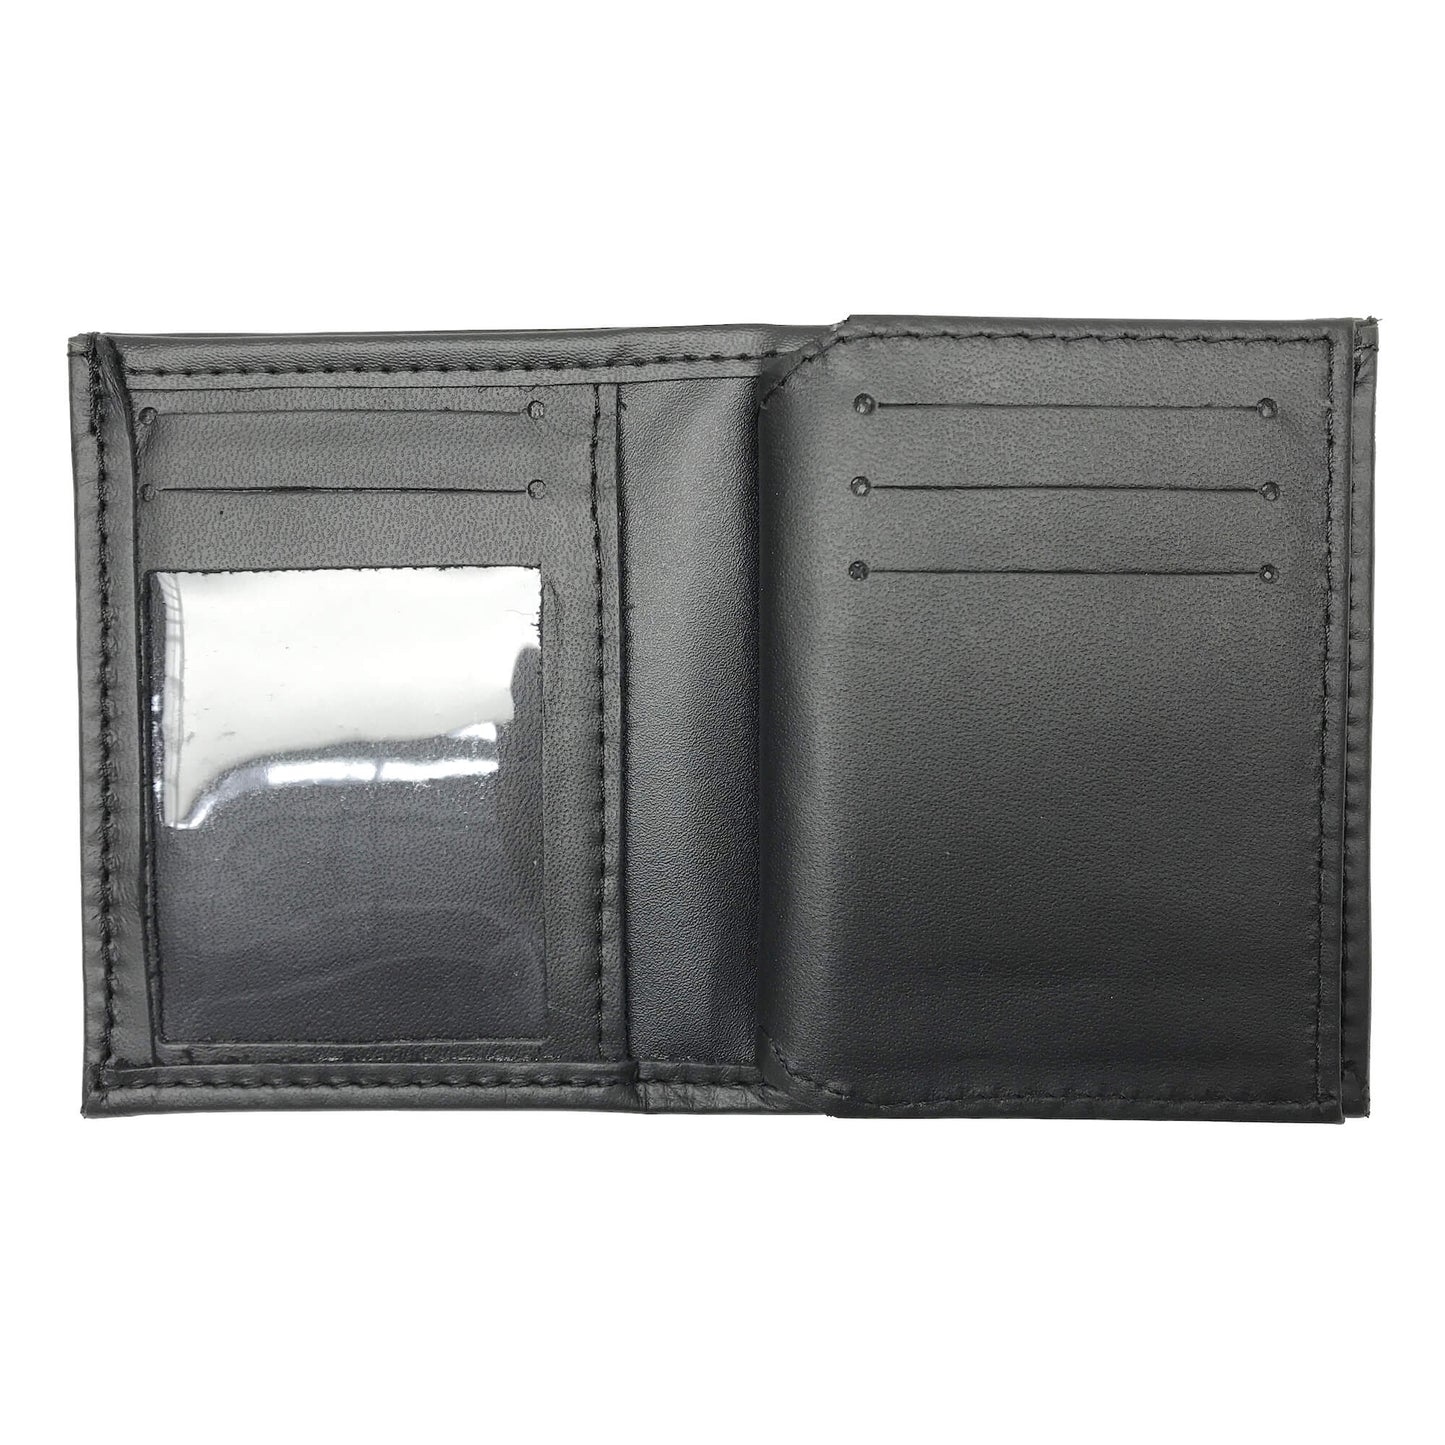 San Diego County Sheriff's Dept. Bifold Hidden Badge Wallet-Perfect Fit-911 Duty Gear USA